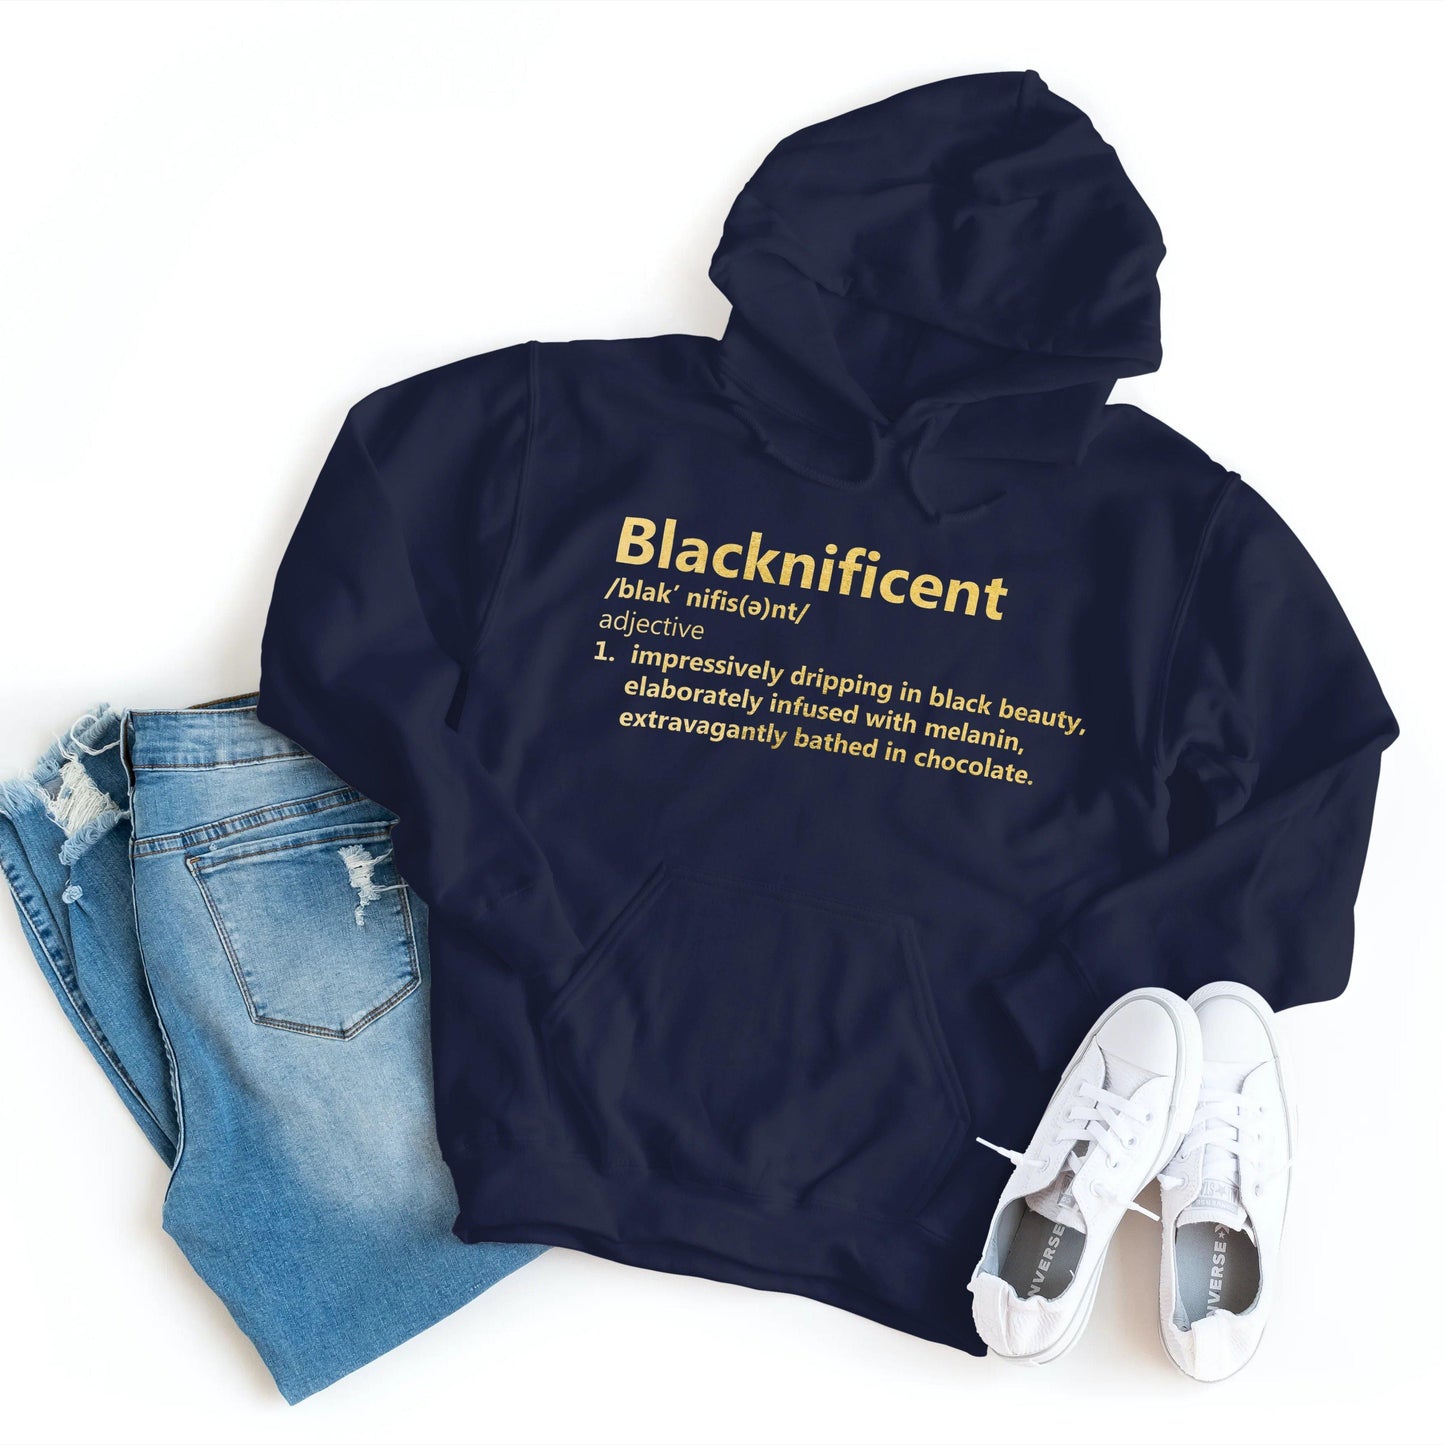 Blacknificent - Gold Foil Hoodie - Healthy Wealthy Skinny